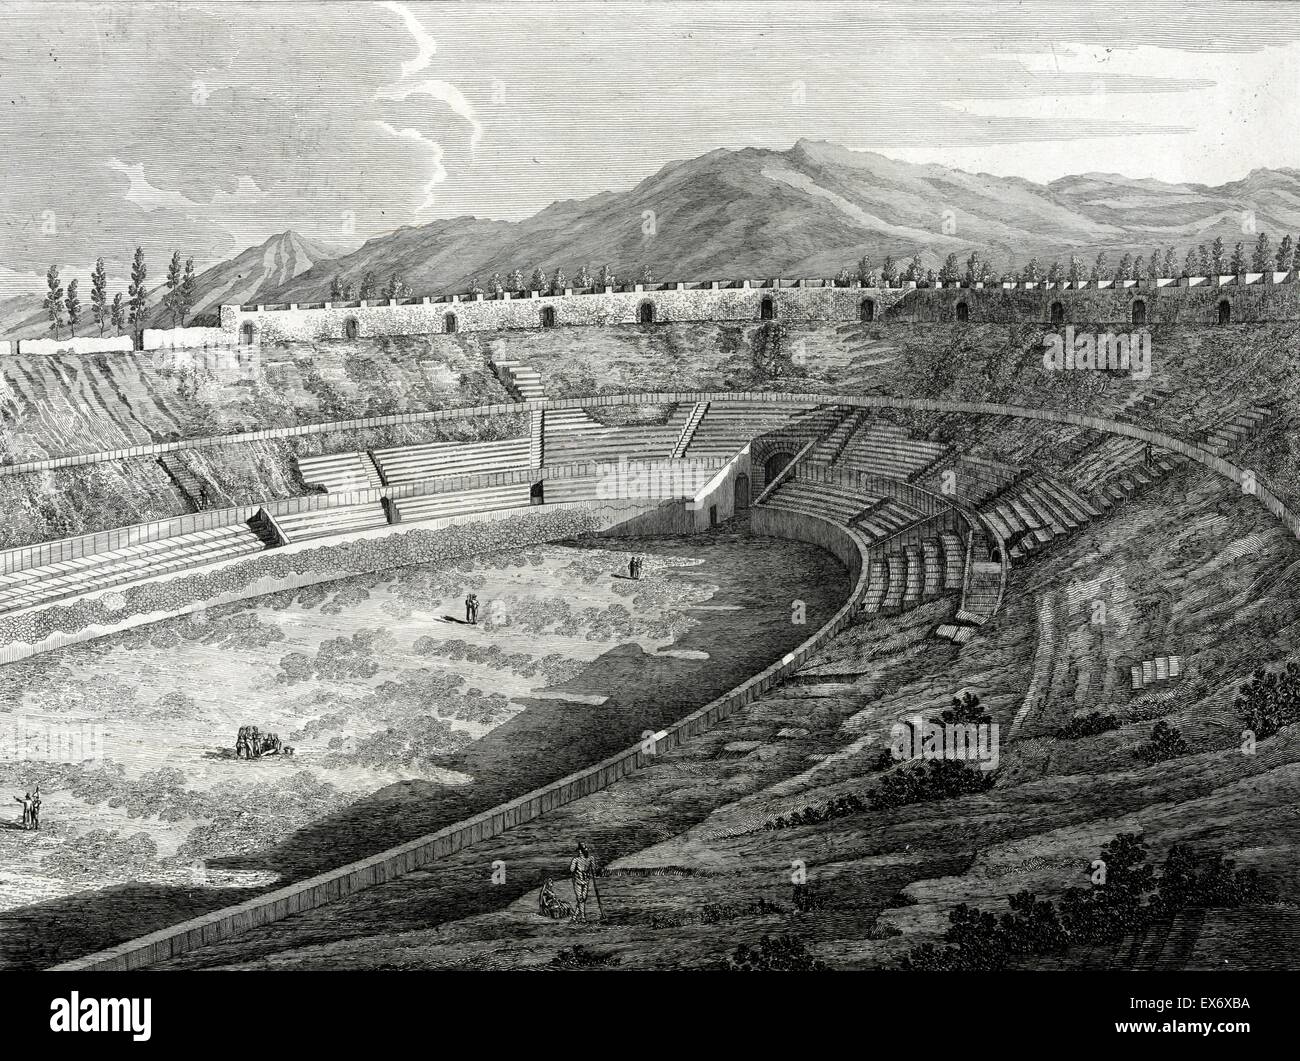 19th century drawing of the Amphitheatre at Pompeii Italy. The Amphitheatre of Pompeii is the oldest surviving Roman amphitheatre. It is located in the ancient Roman city of Pompeii, and was buried by the eruption of Vesuvius in 79 CE Stock Photo